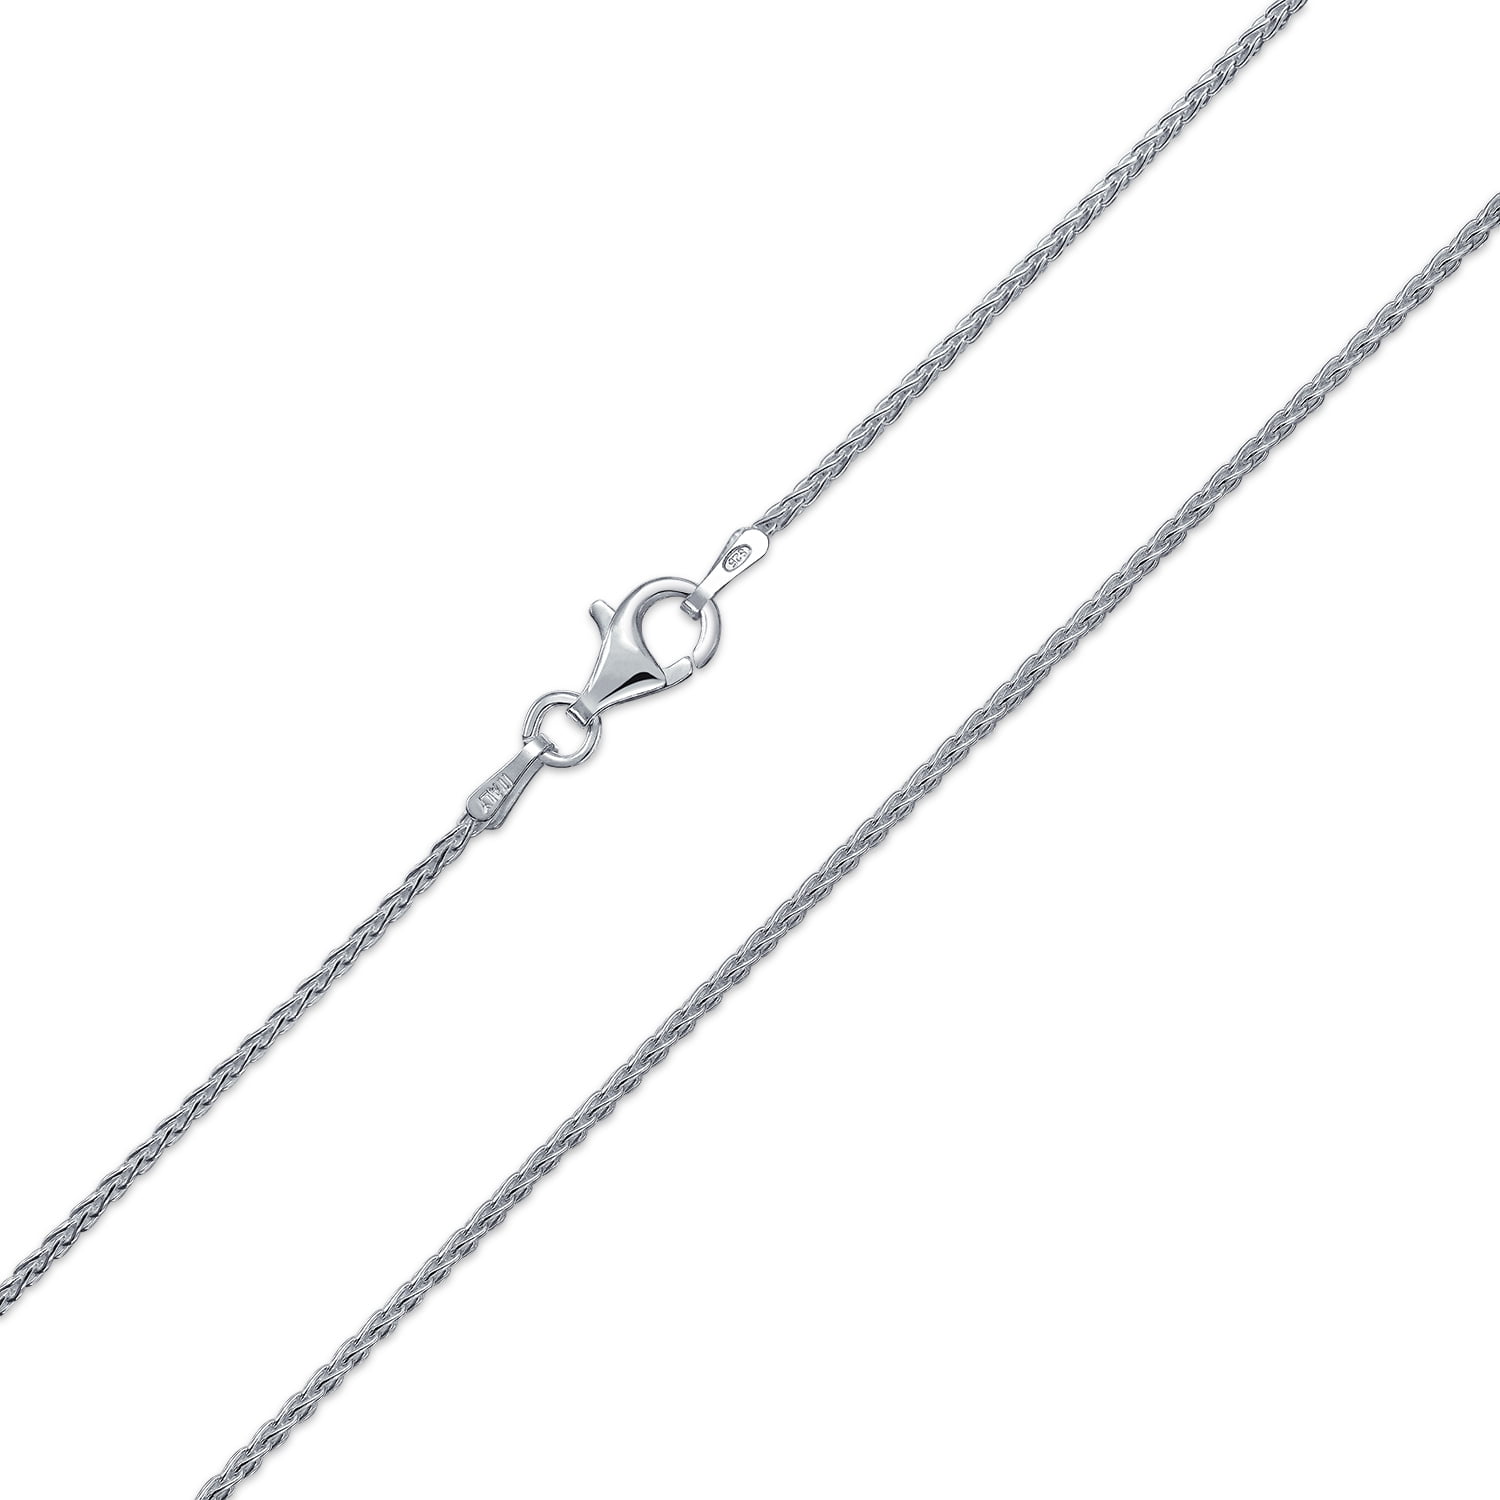 Details about   Verona Jewelers Mens 925 Sterling Silver 4MM Italian Curb Link Chain Necklace